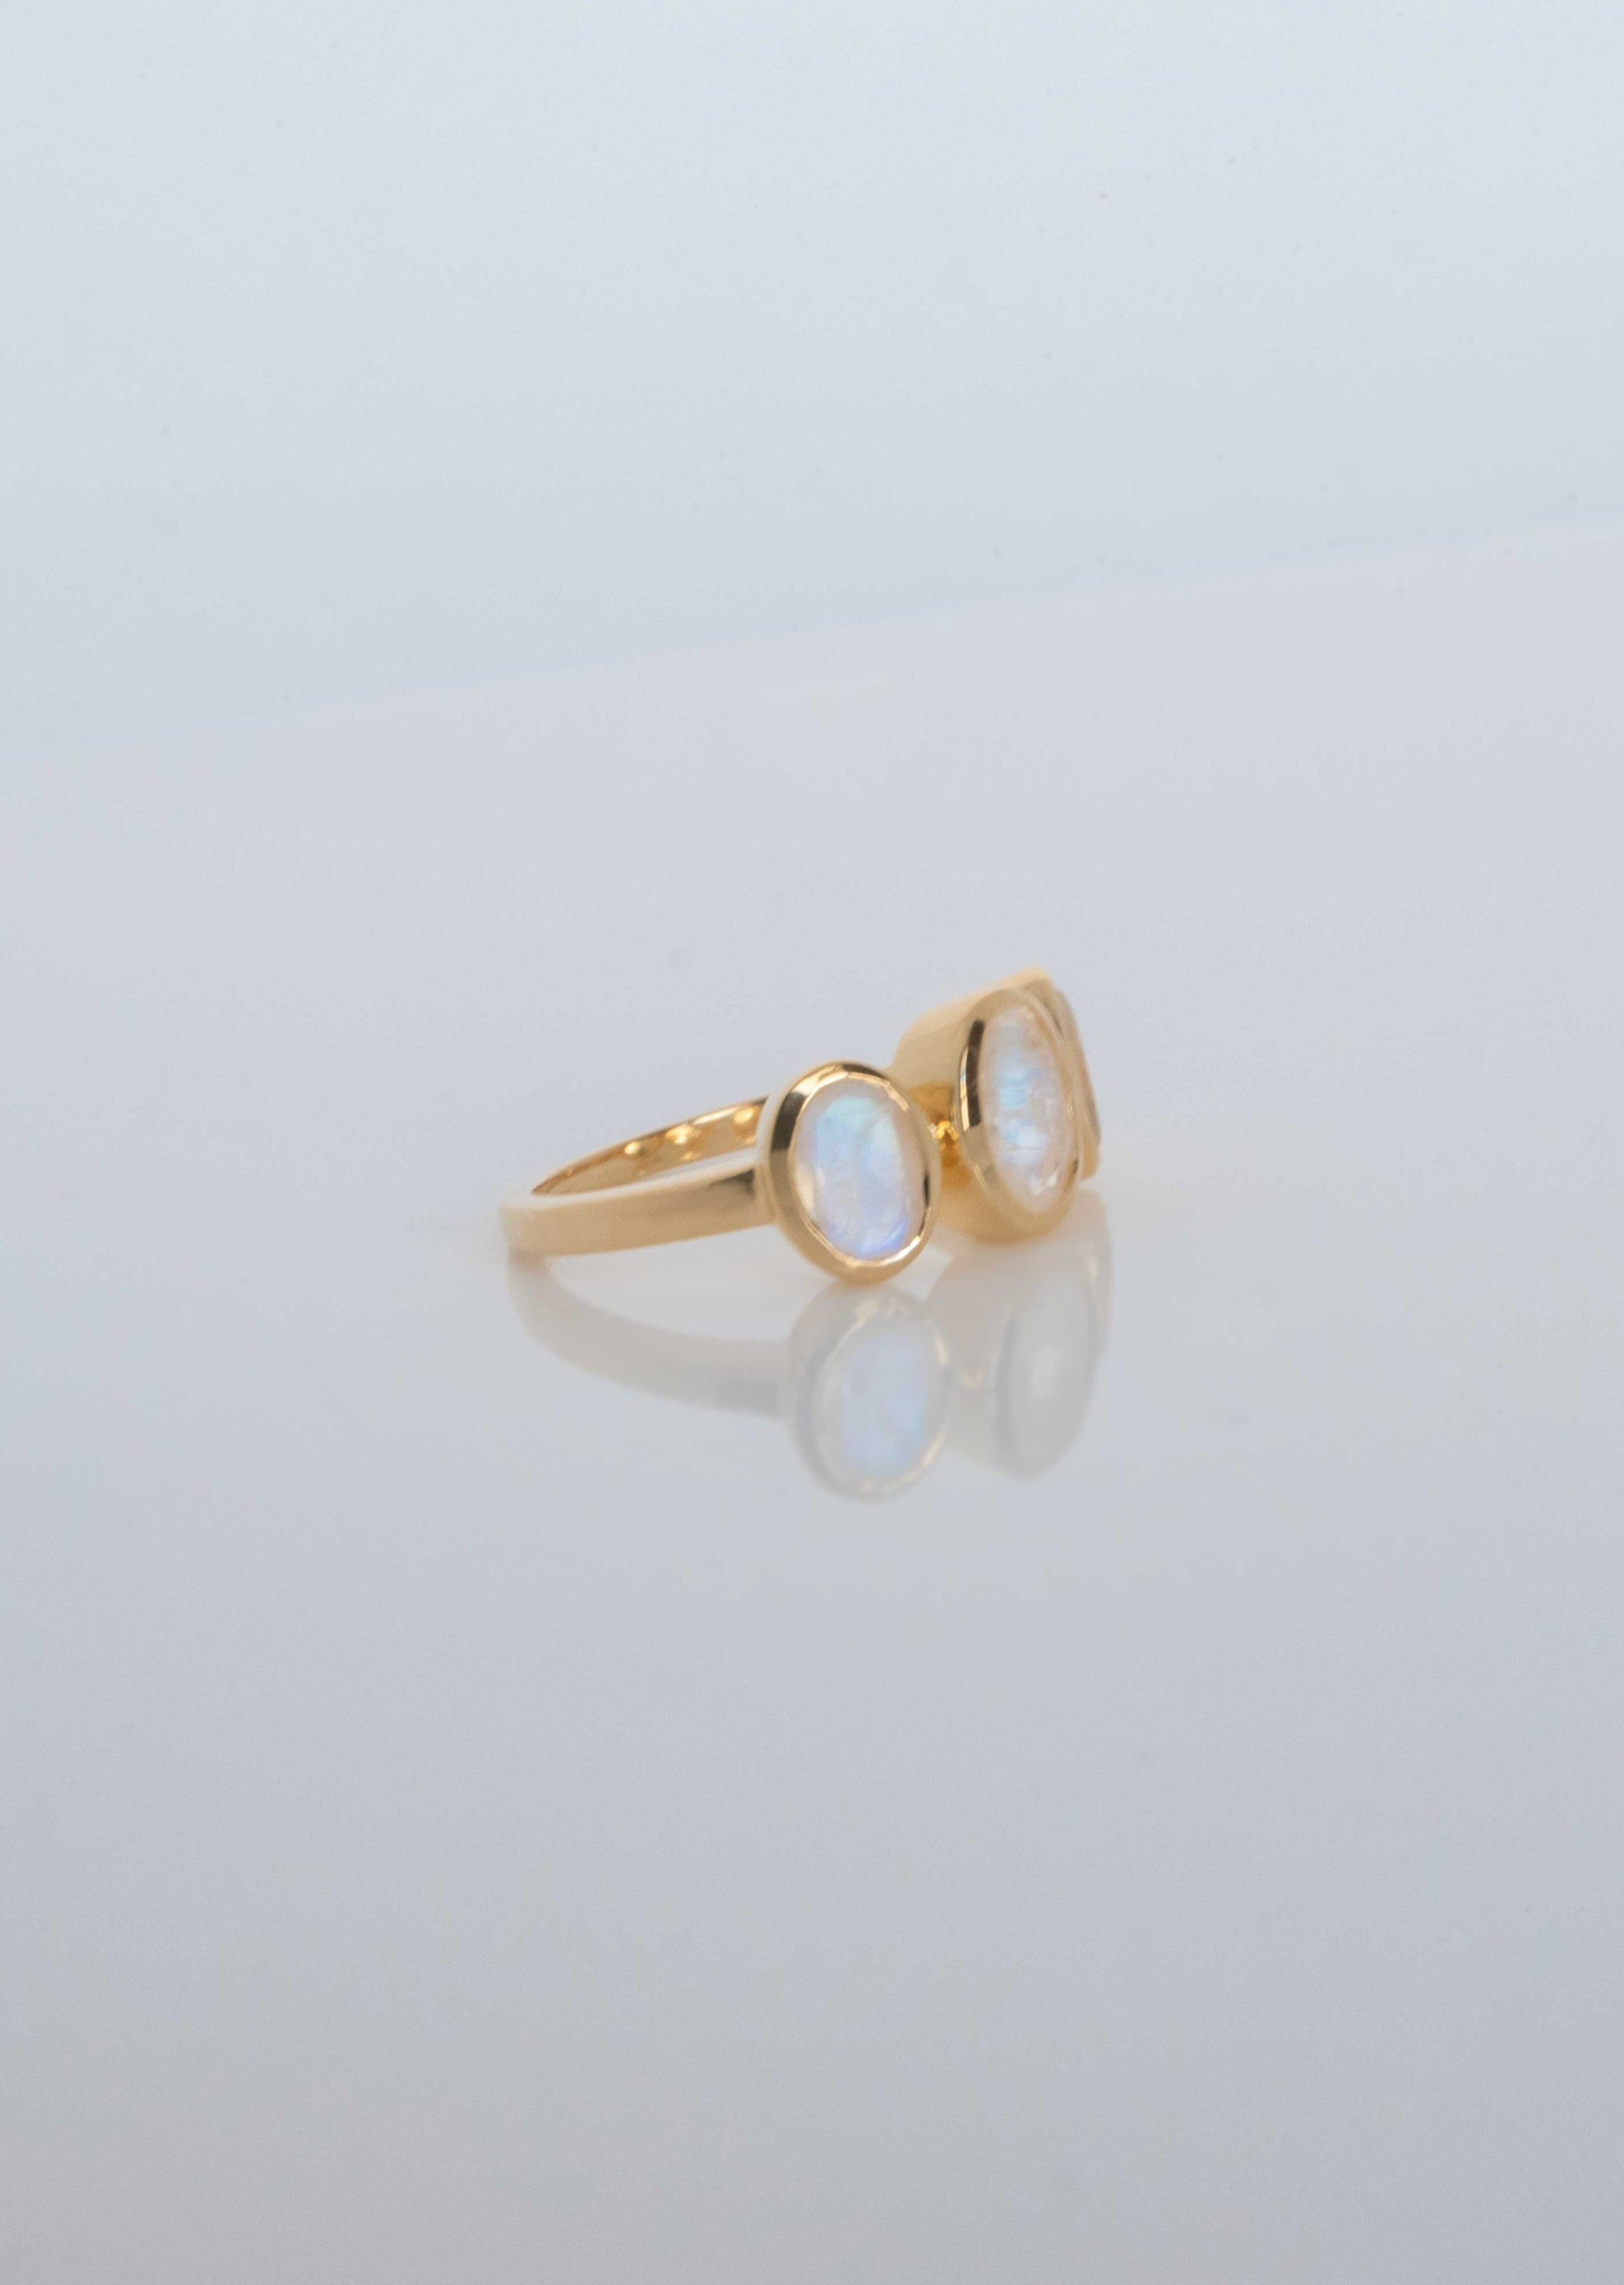 Three Moonstone ring silver gold rose gold